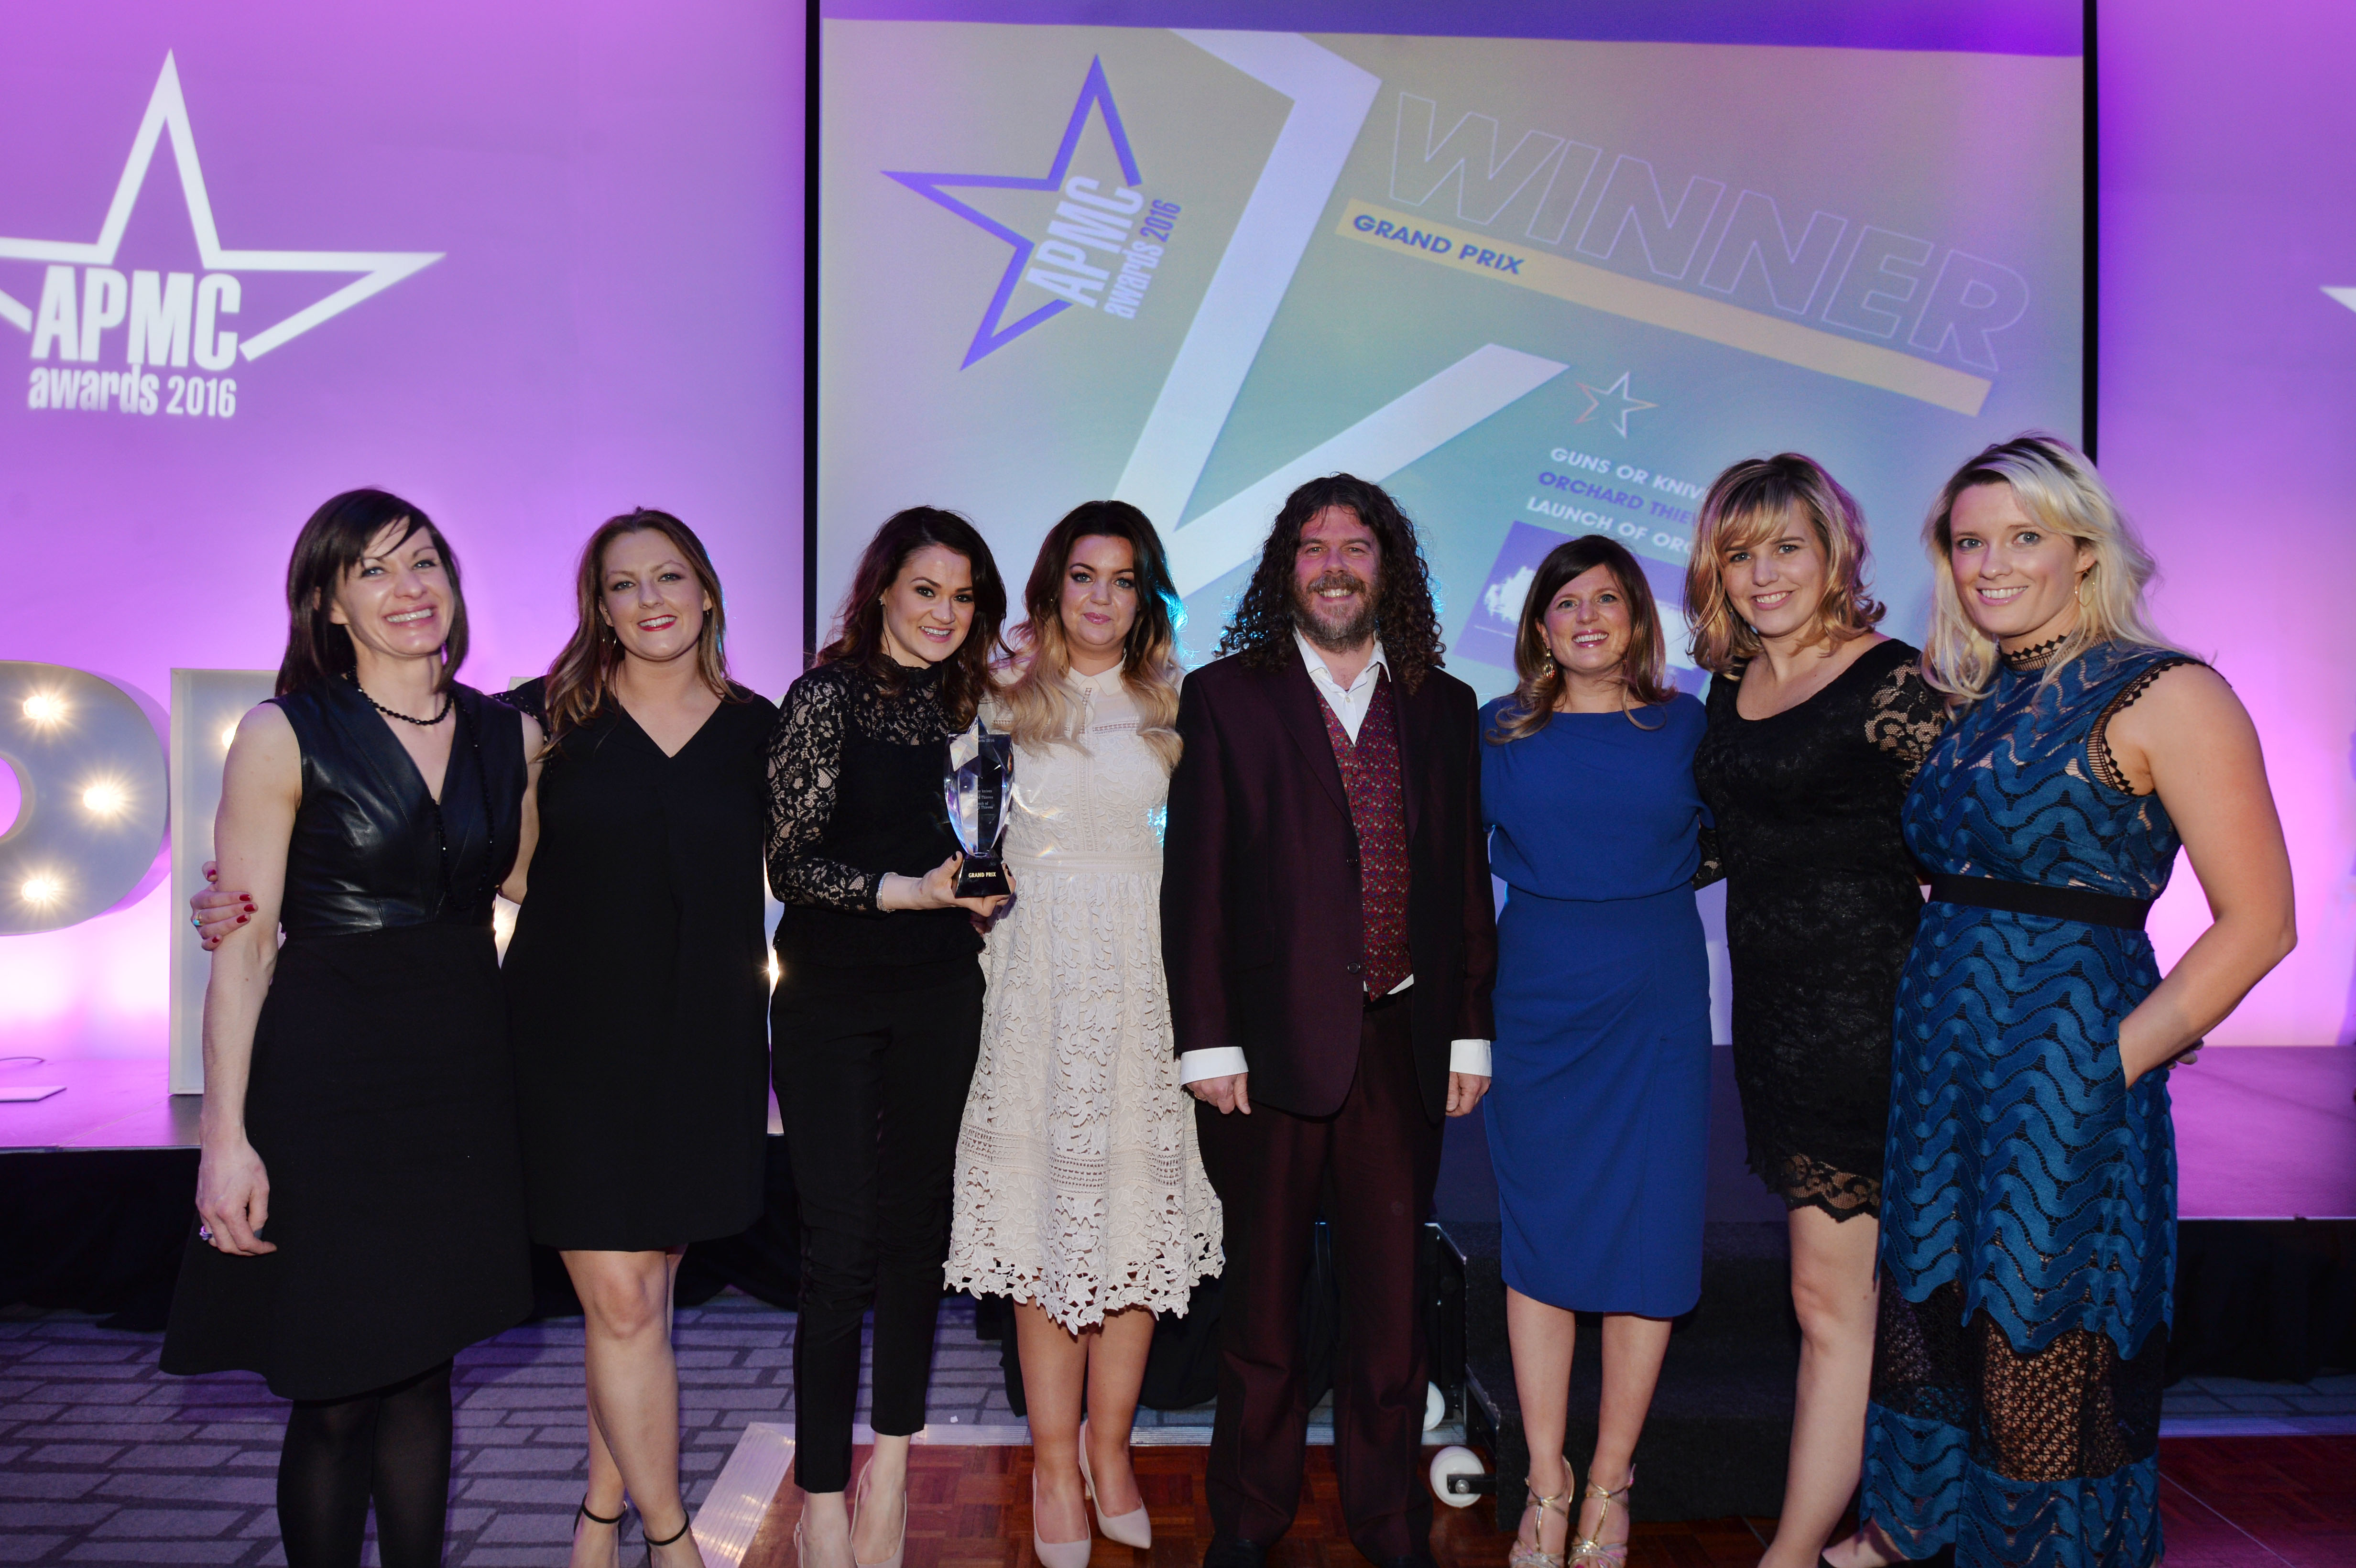 REPRO FREE Images 022 Garry Munns (Centre) Chairperson of the APMC Judging Panel presenting the 2016 Grand Prix and overall best promotional marketing campaign at the APMC Star awards 2016 to Paula Conlon (Orchard Thieves), Roisin Field, Heidi McCaughey(Orchard Thieves), Kerrie Sweeney, Heather Judge, Hanne Villadsen, and Zara Flynn from Guns or Knives for Orchard Thieves Launch at the Association of Promotional Marketing Consultants APMC Star Awards 2016 in the Marker Hotel on Friday 15th April 2016.